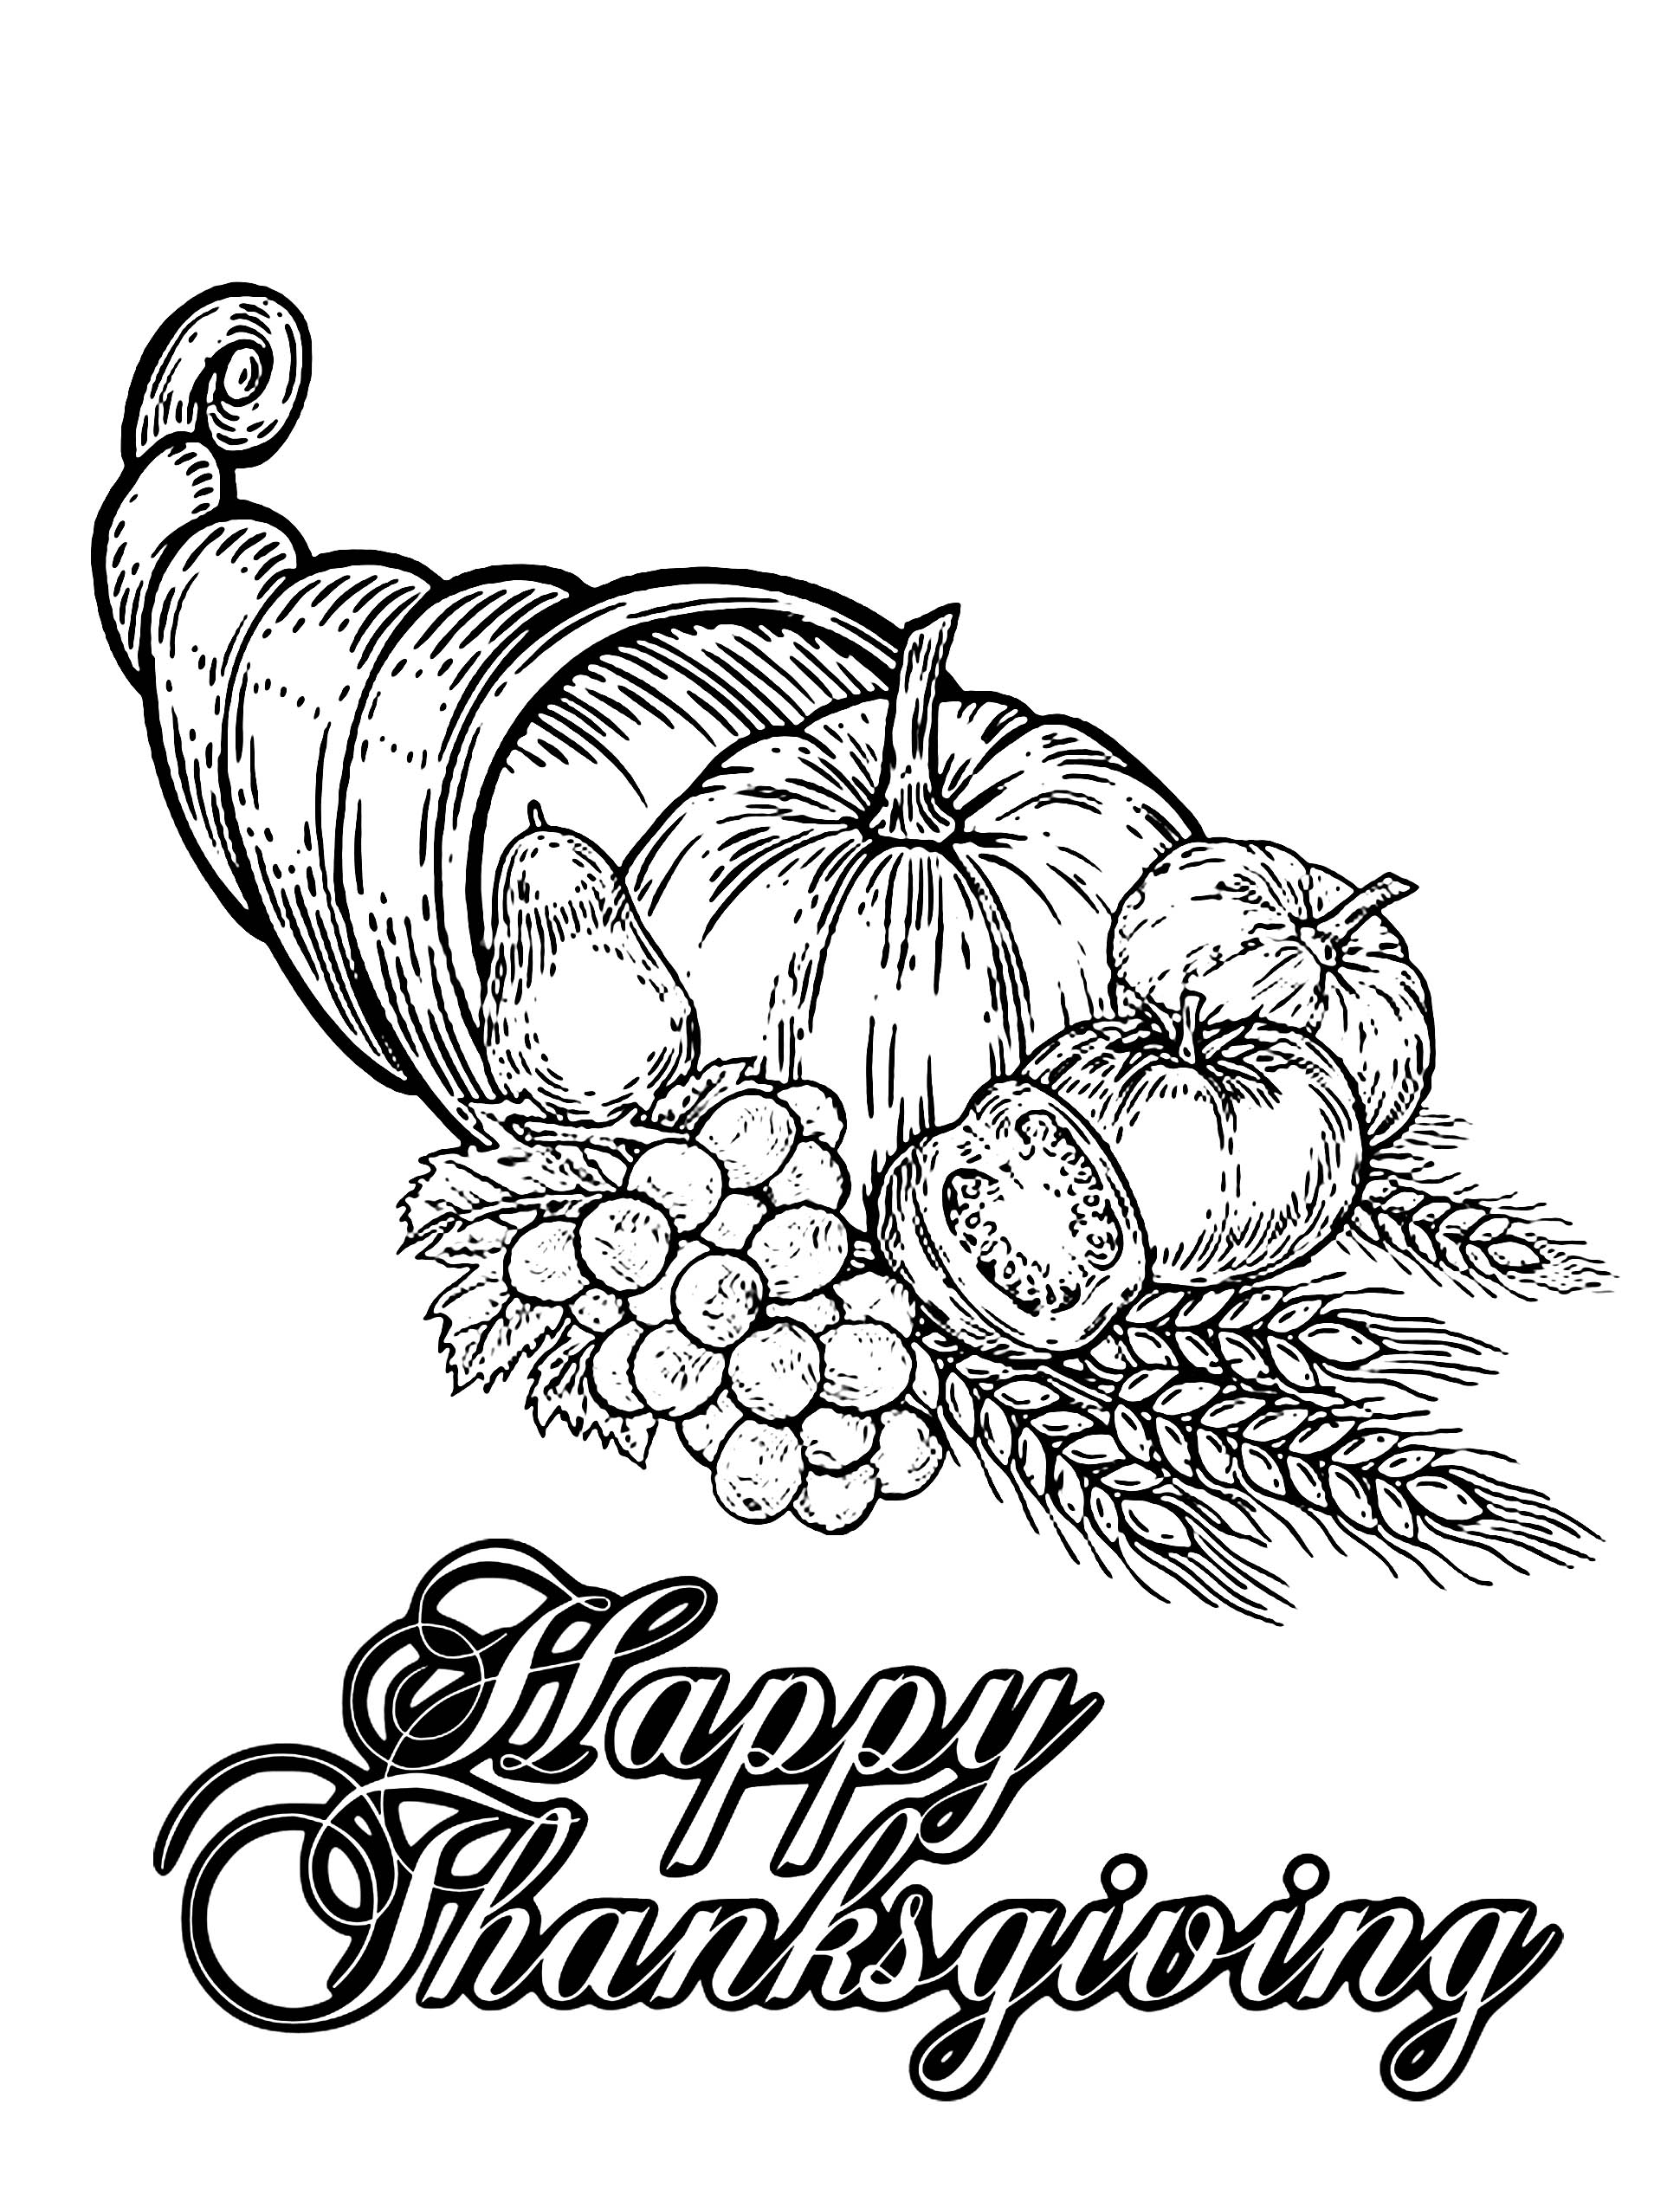 Happy thanksgiving ThanksgivingColoring Pages Page native